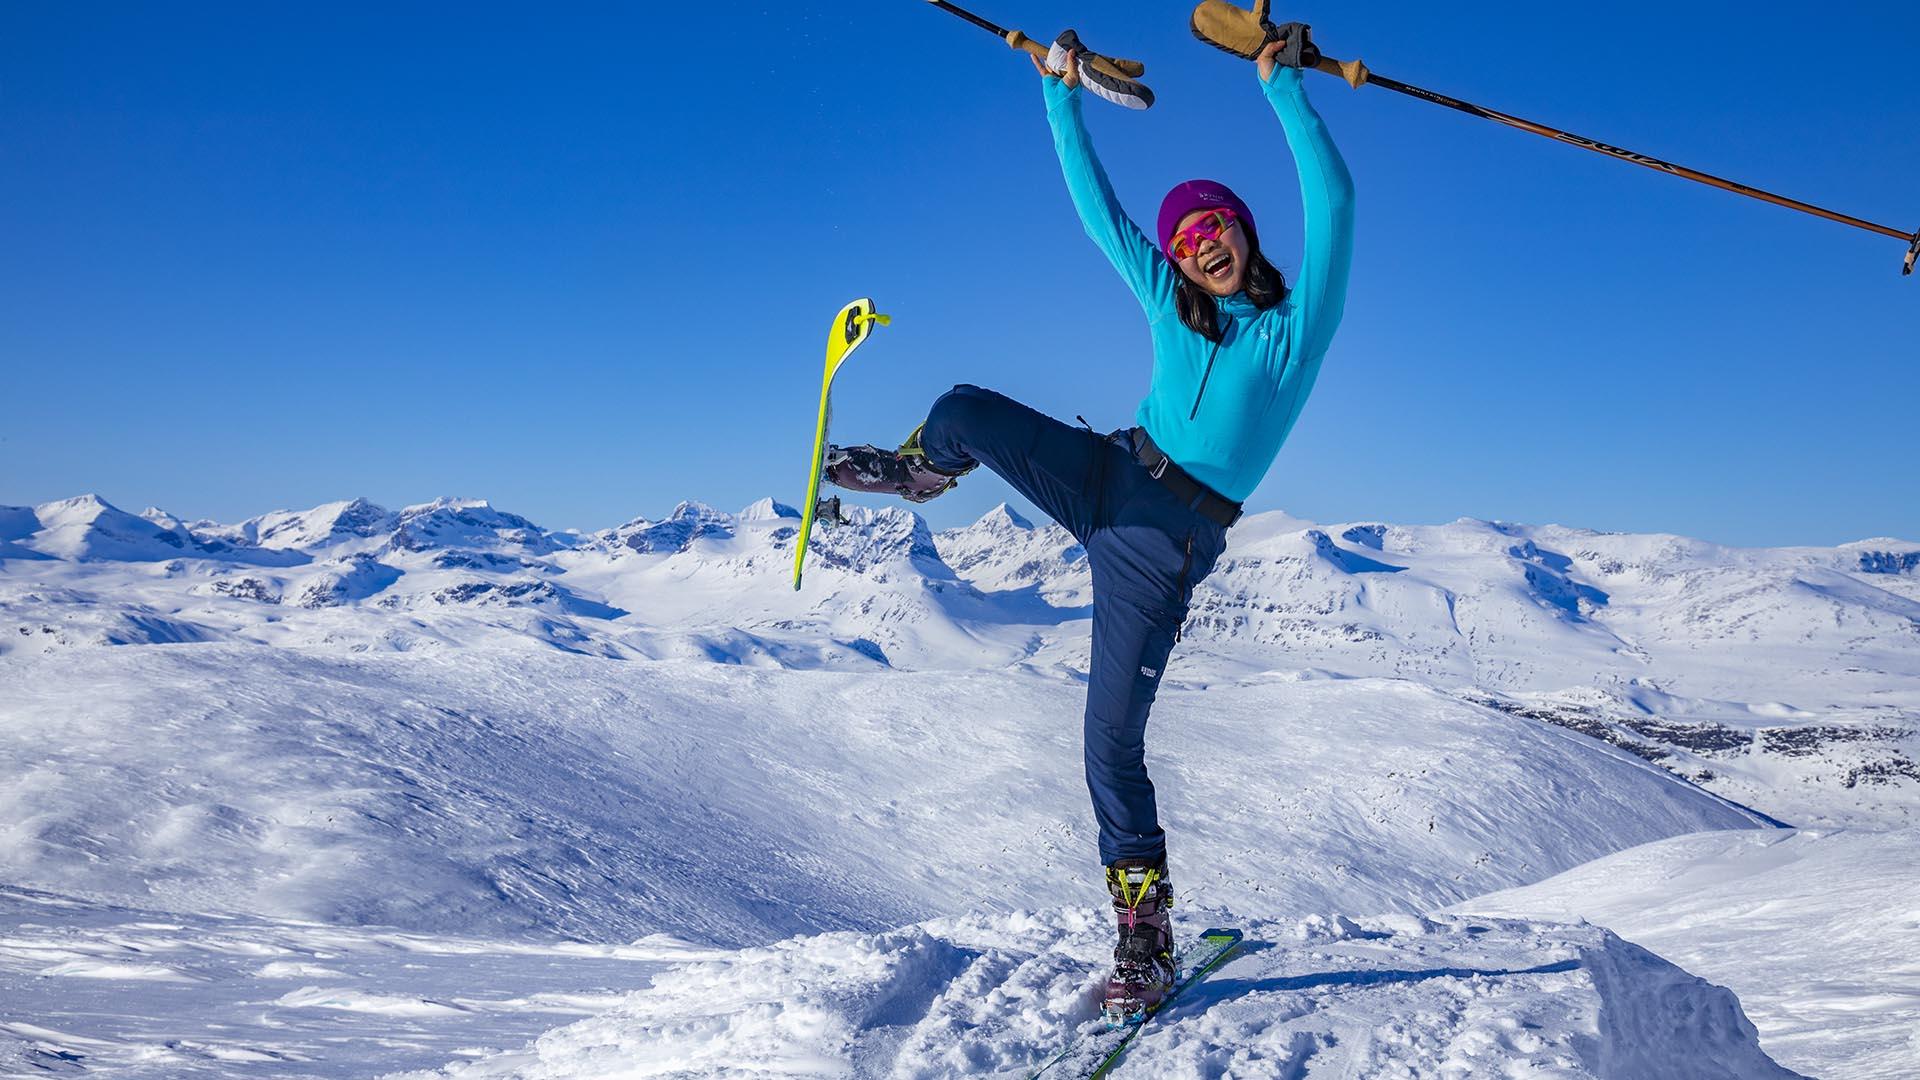 Girl on mountain top with randonee skis. Happy she is stretching her arms and lifting one foot with the ski. Wide view over snow covered mountains in the background.